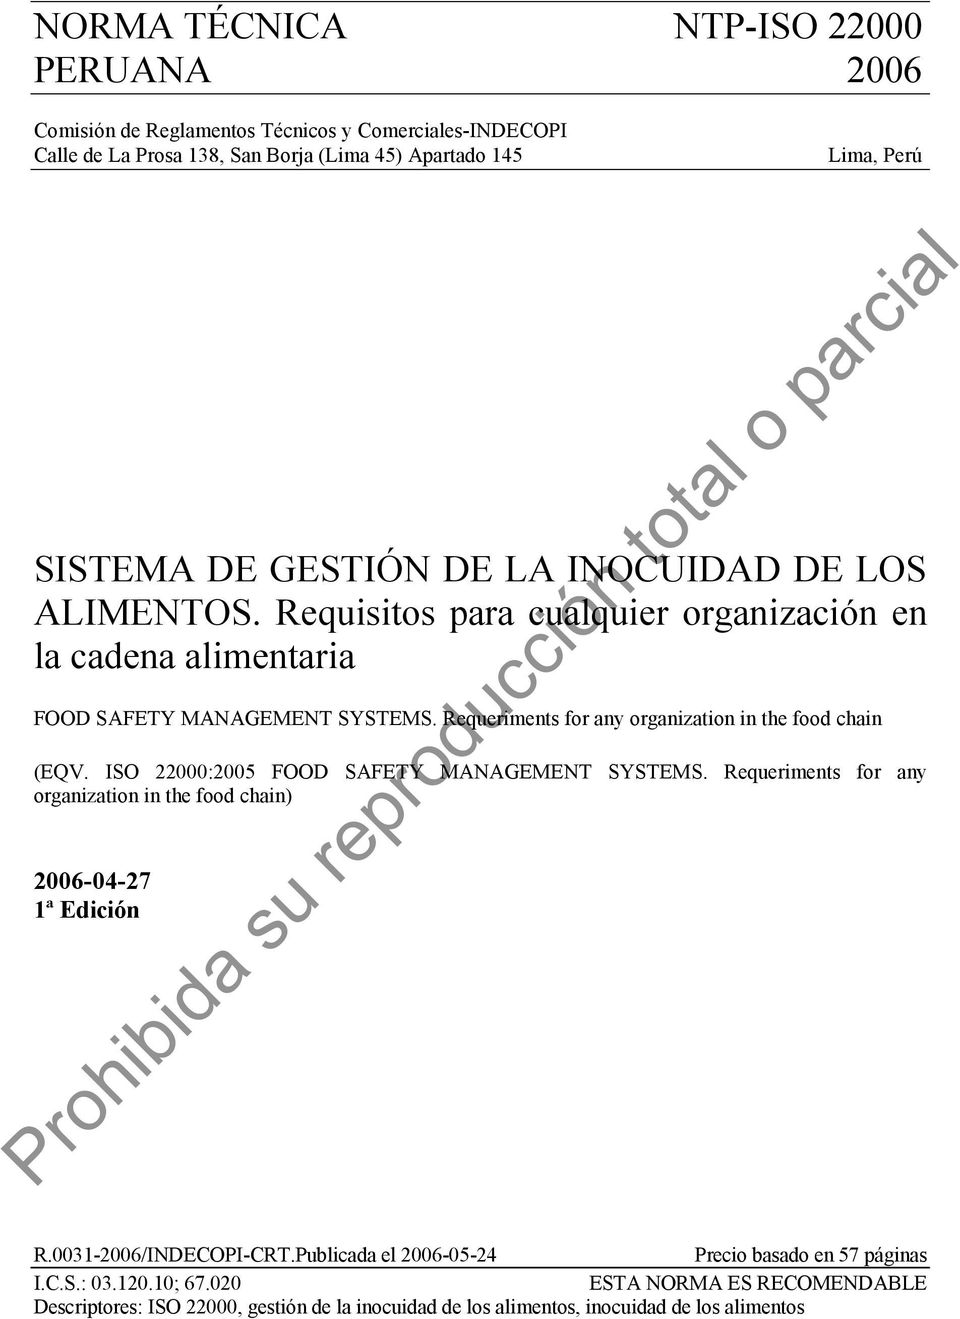 ISO 22000:2005 FOOD SAFETY MANAGEMENT SYSTEMS. Requeriments for any organization in the food chain) 2006-04-27 1ª Edición R.0031-2006/INDECOPI-CRT.